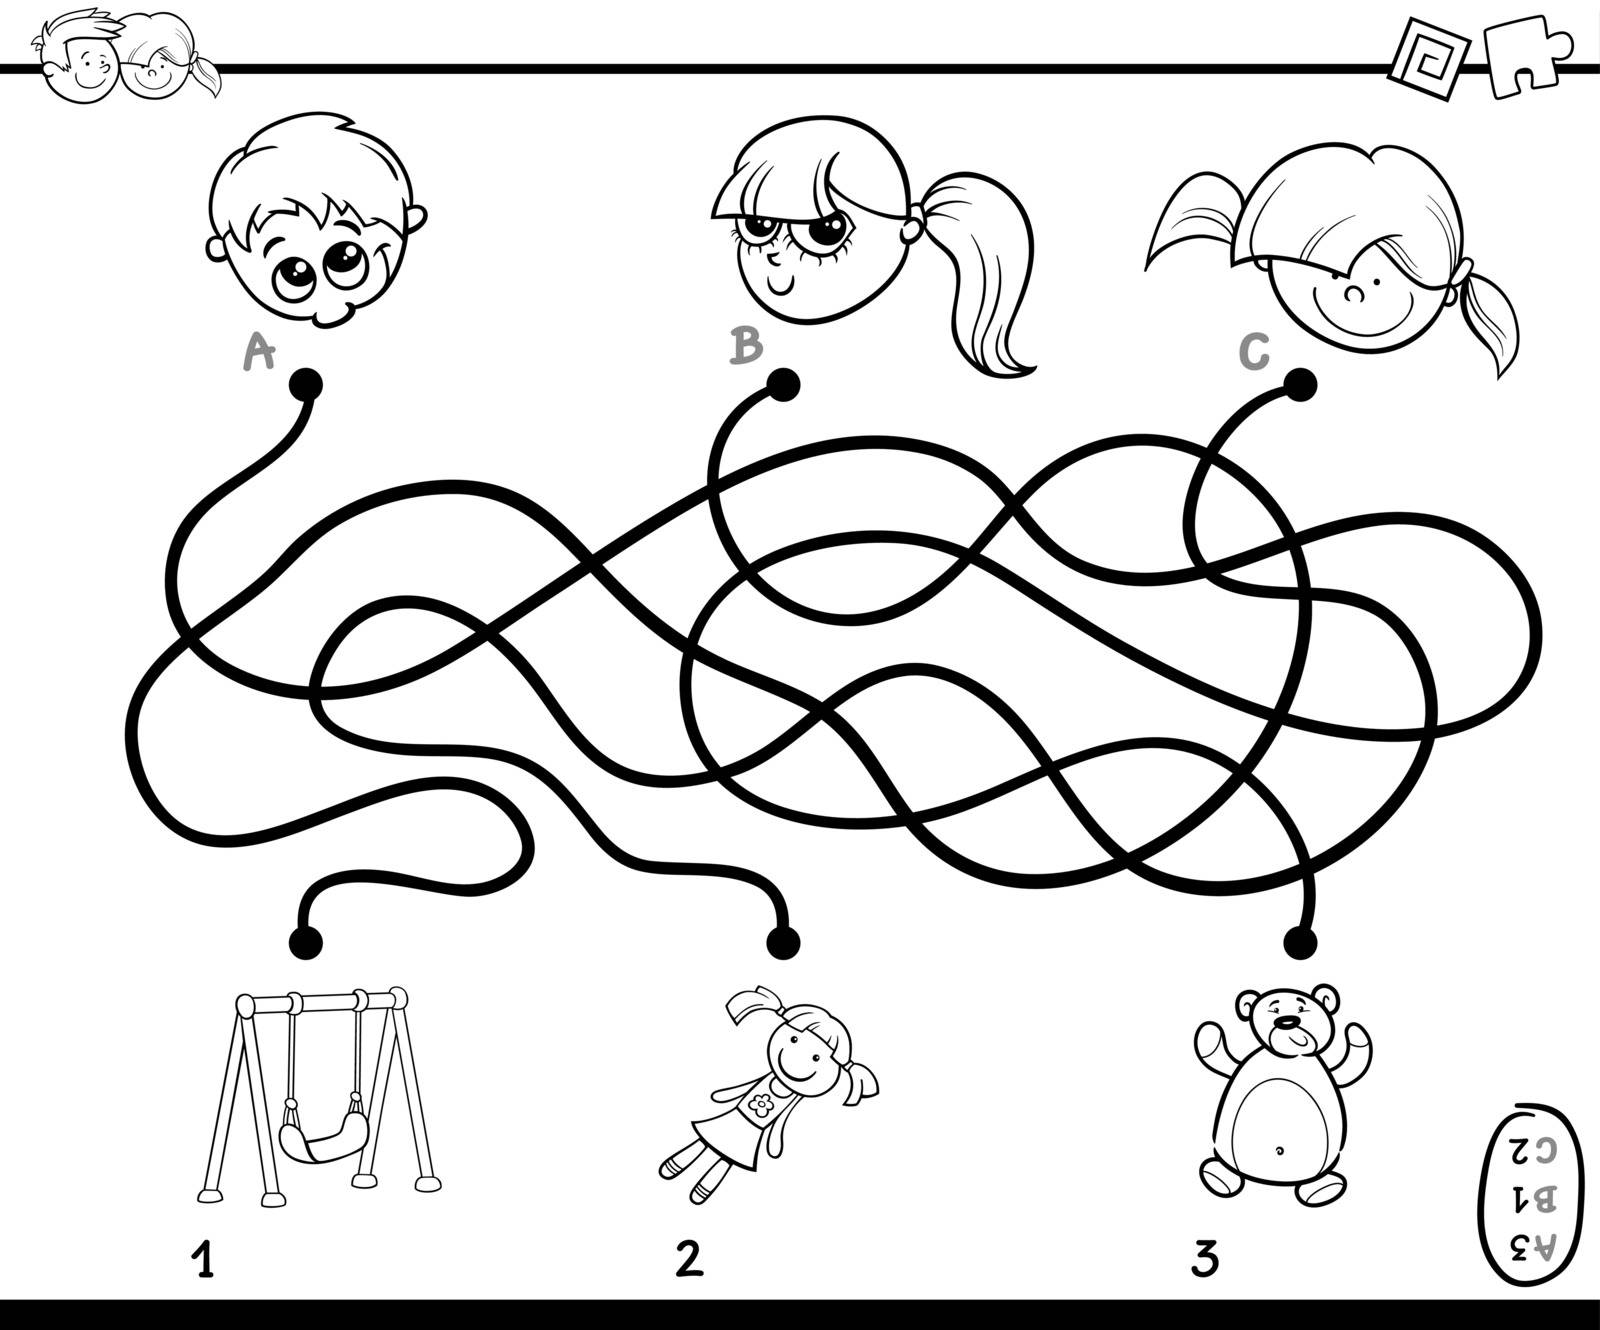 Black and White Cartoon Illustration of Education Paths or Maze Puzzle Game with Children and Toys